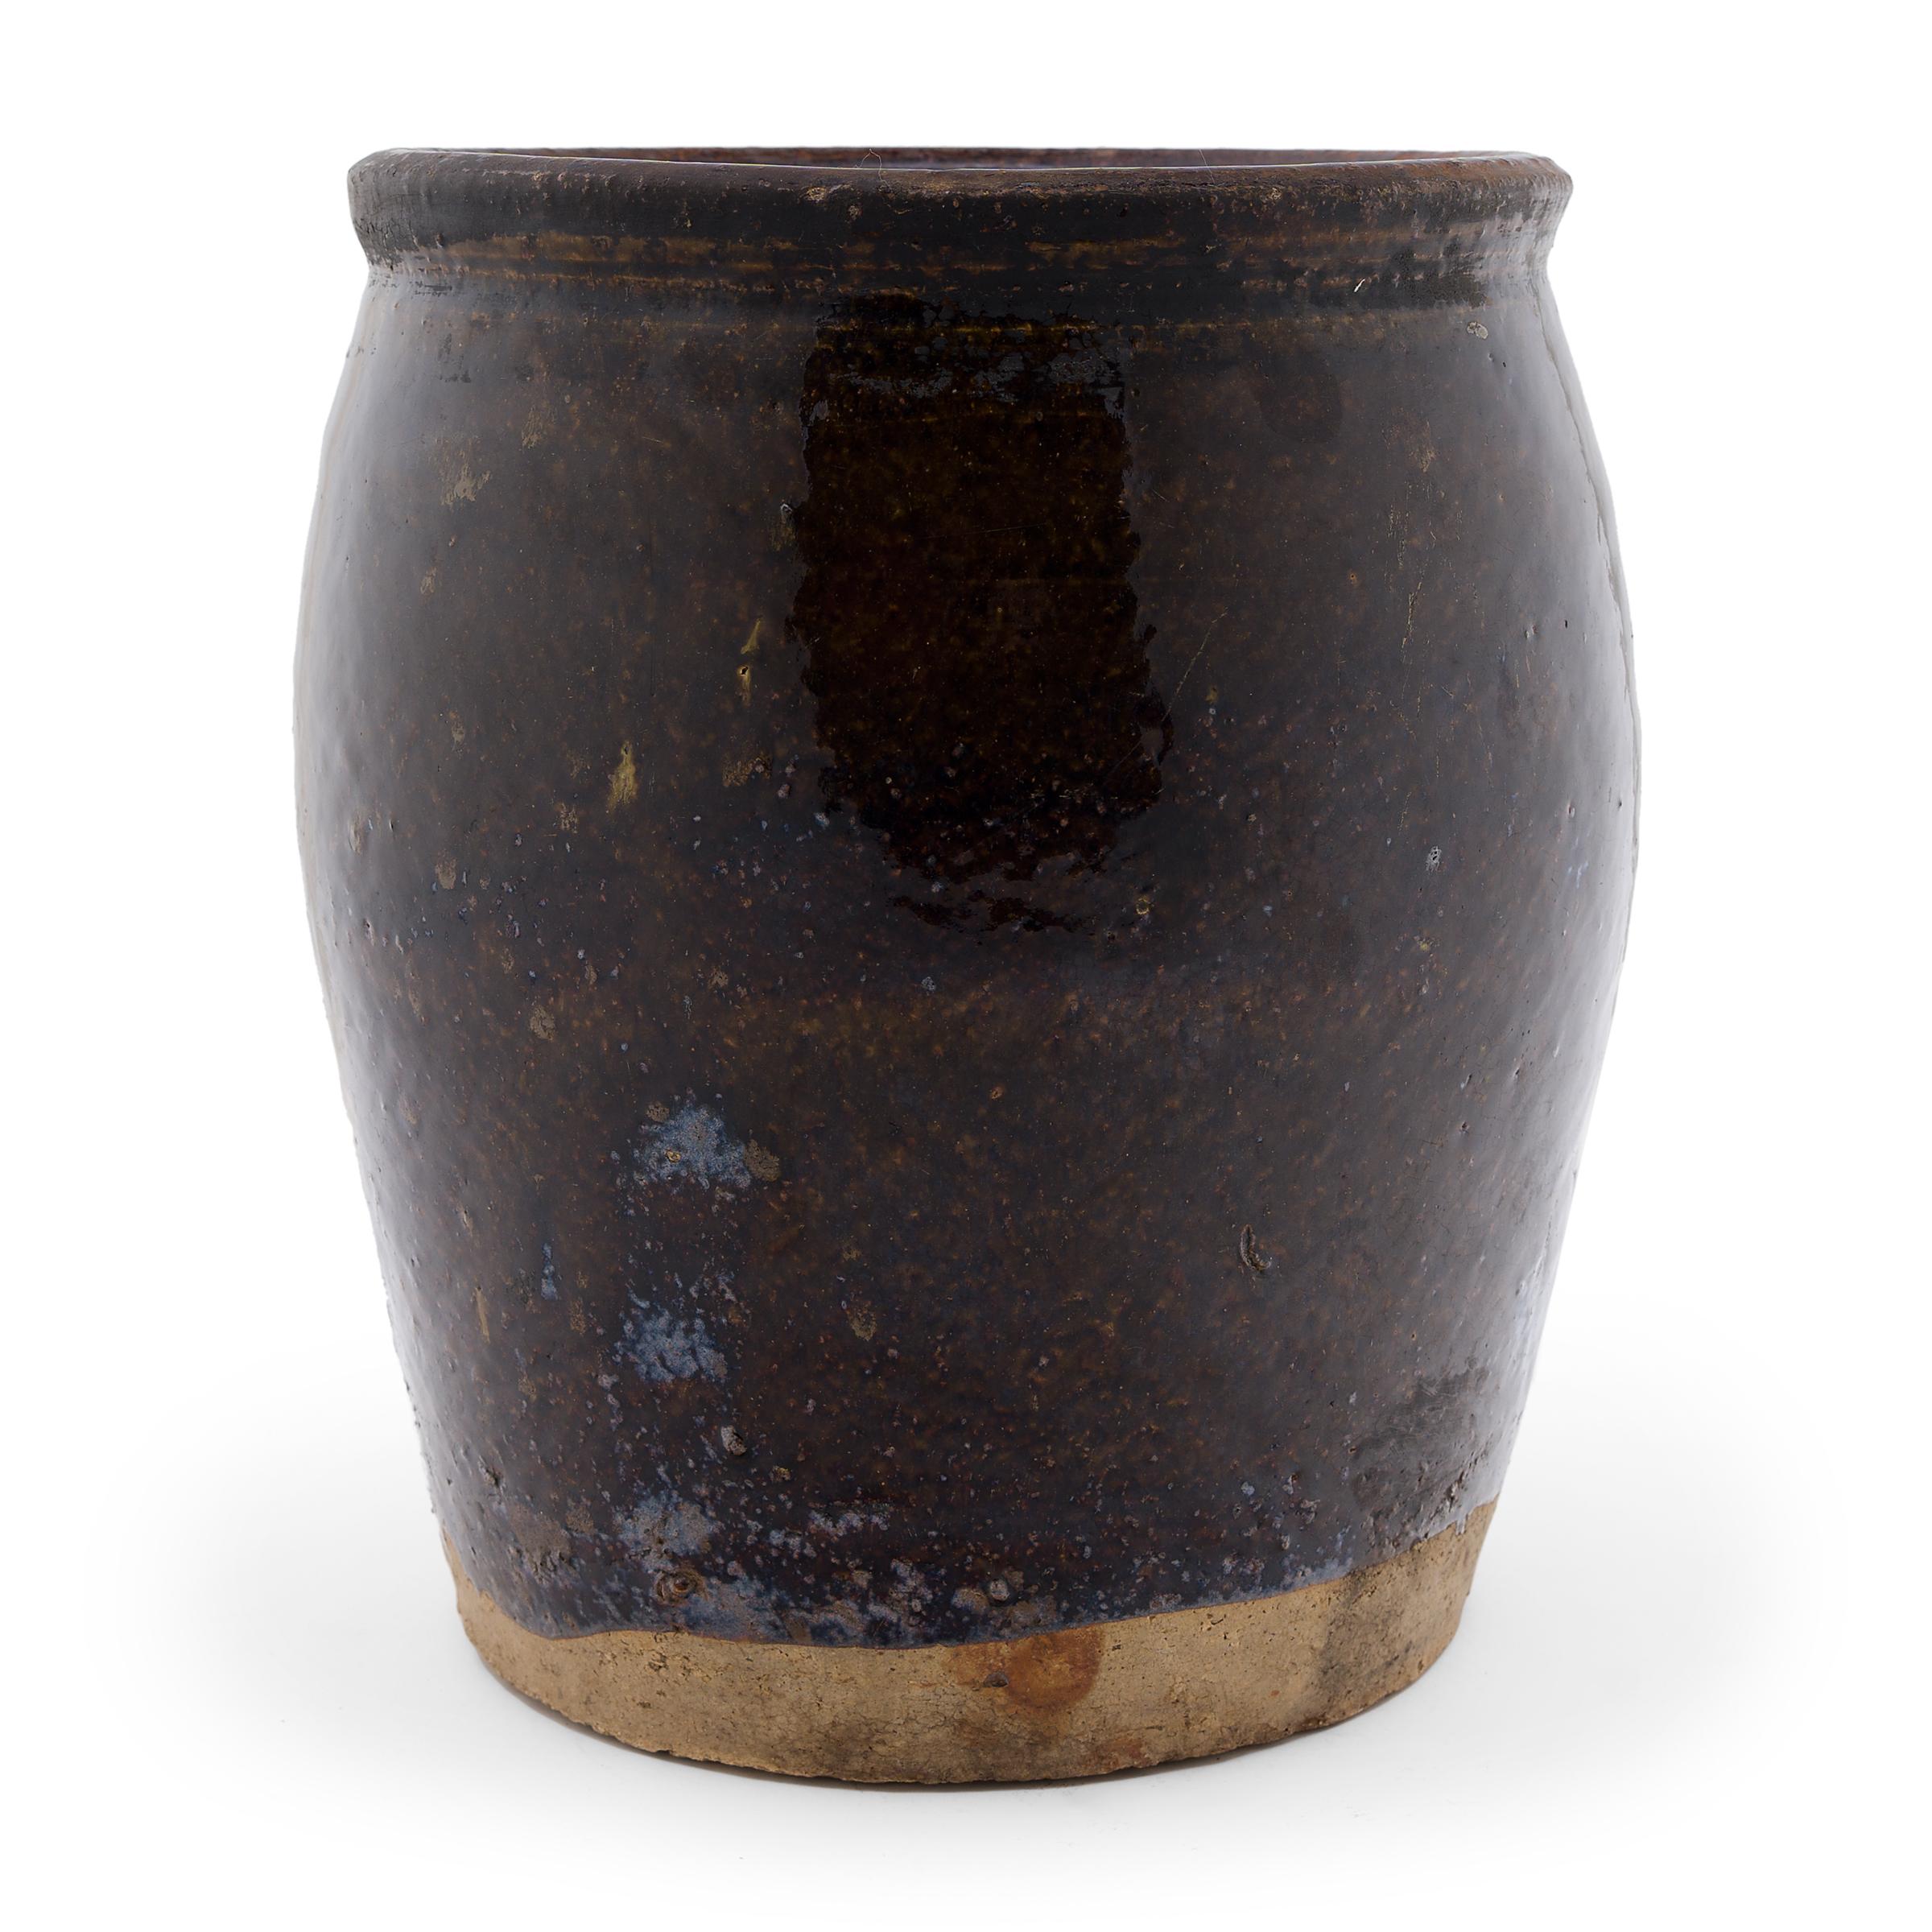 Coated inside and out with a rich, dark brown glaze, this 19th-century jar was originally used for fermenting foods and condiments in a provincial Chinese kitchen. The wide-mouth jar has a slightly tapered form with rounded shoulders and a flared